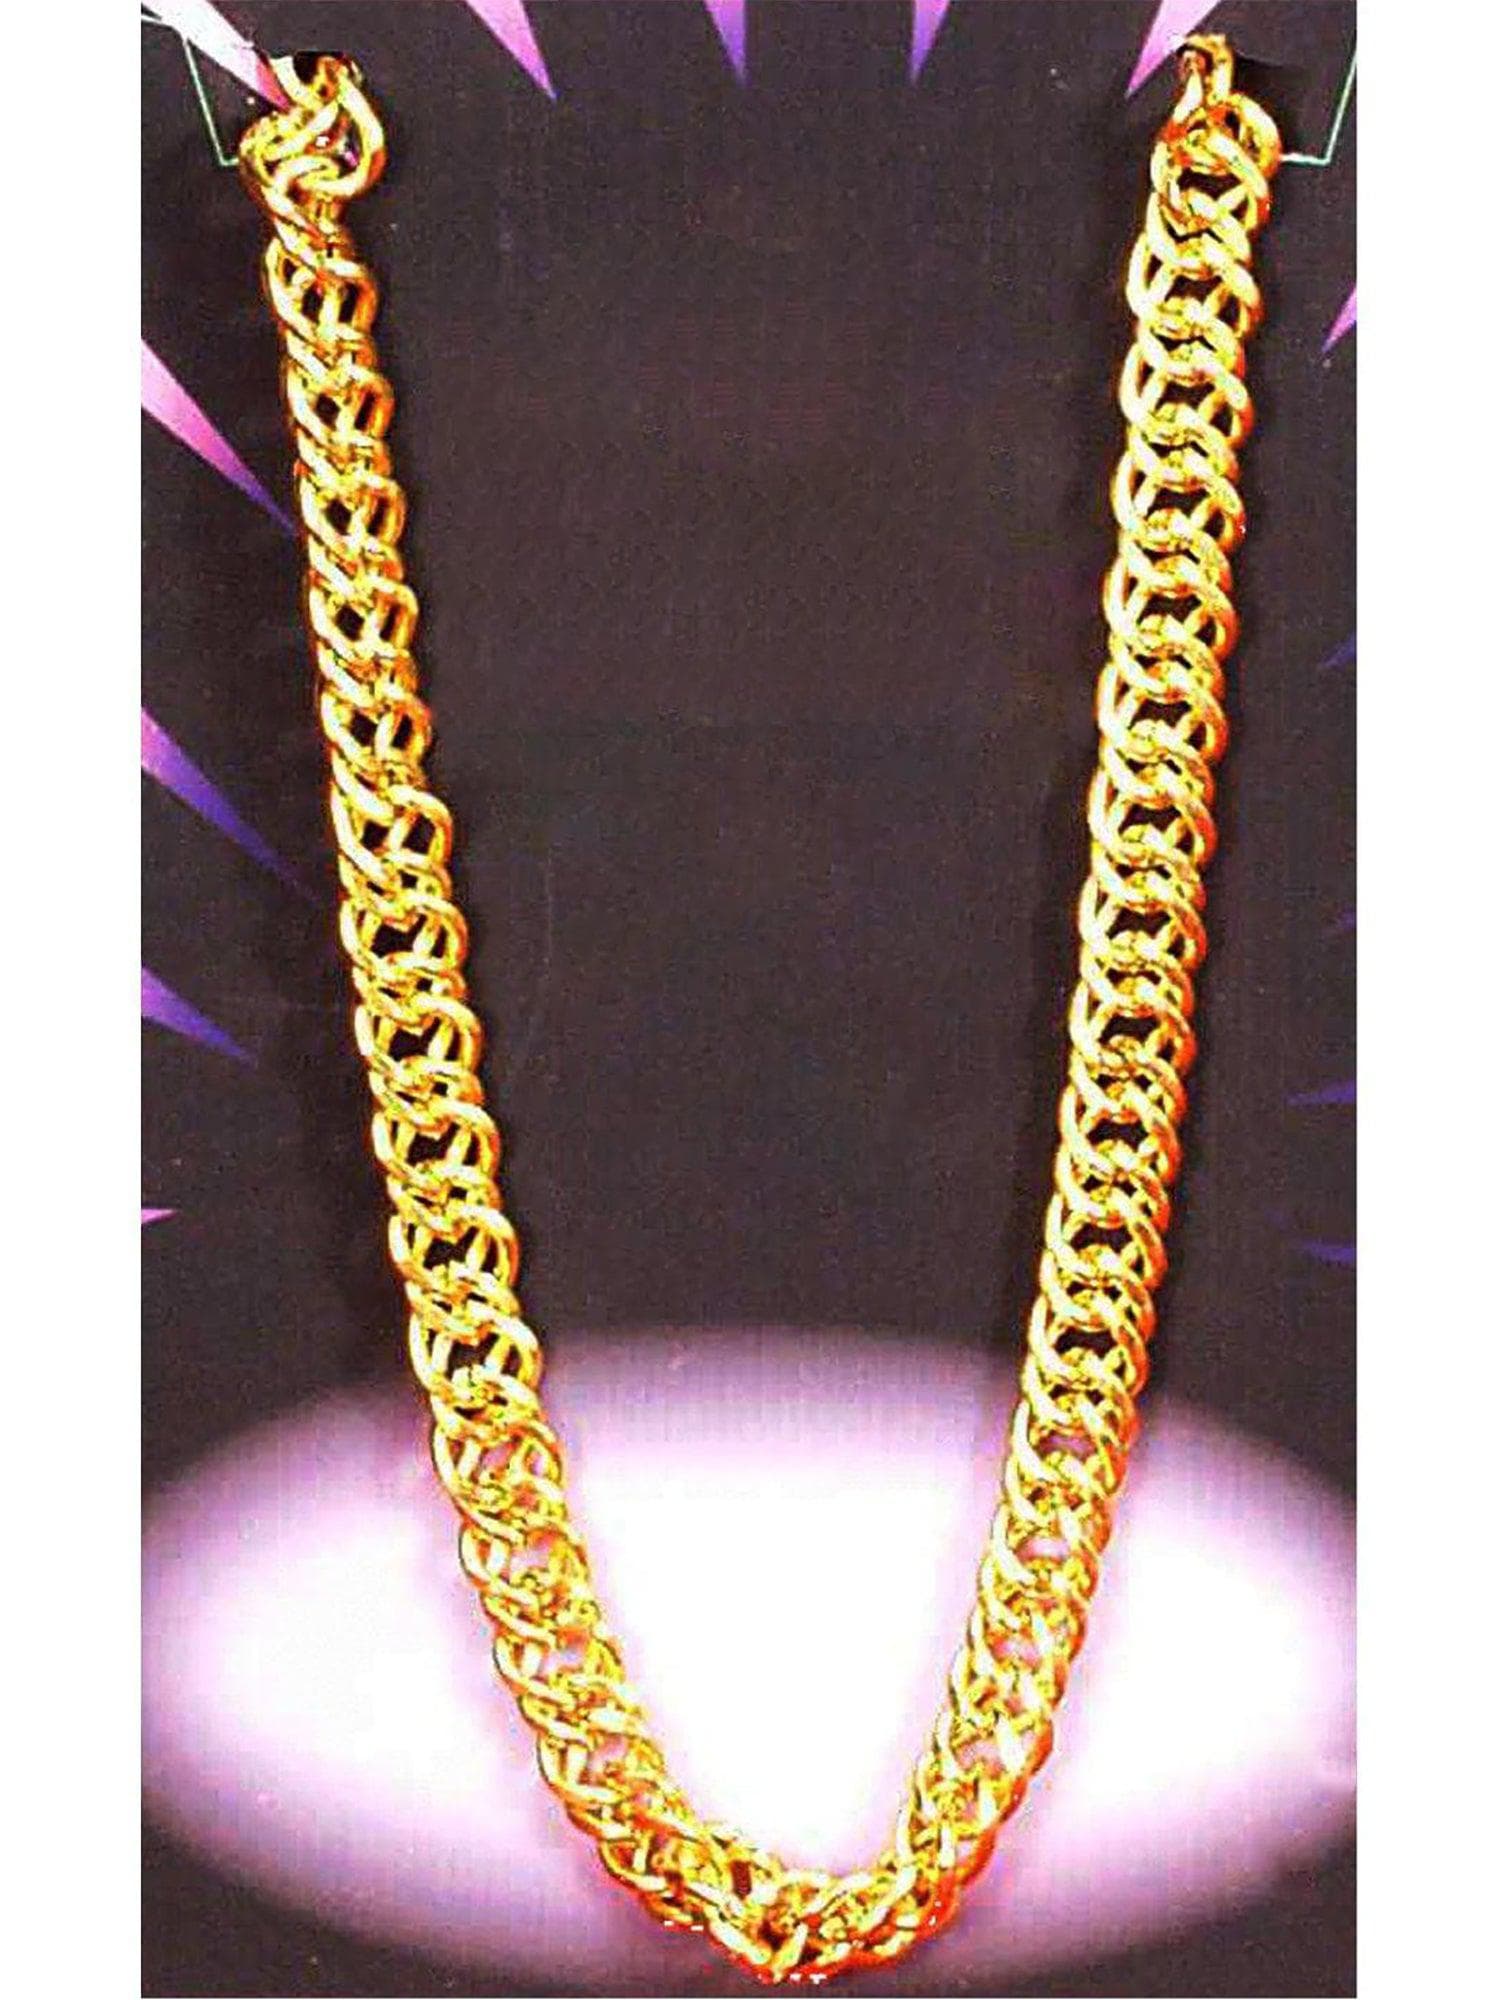 Adult Gold Chain Necklace - costumes.com